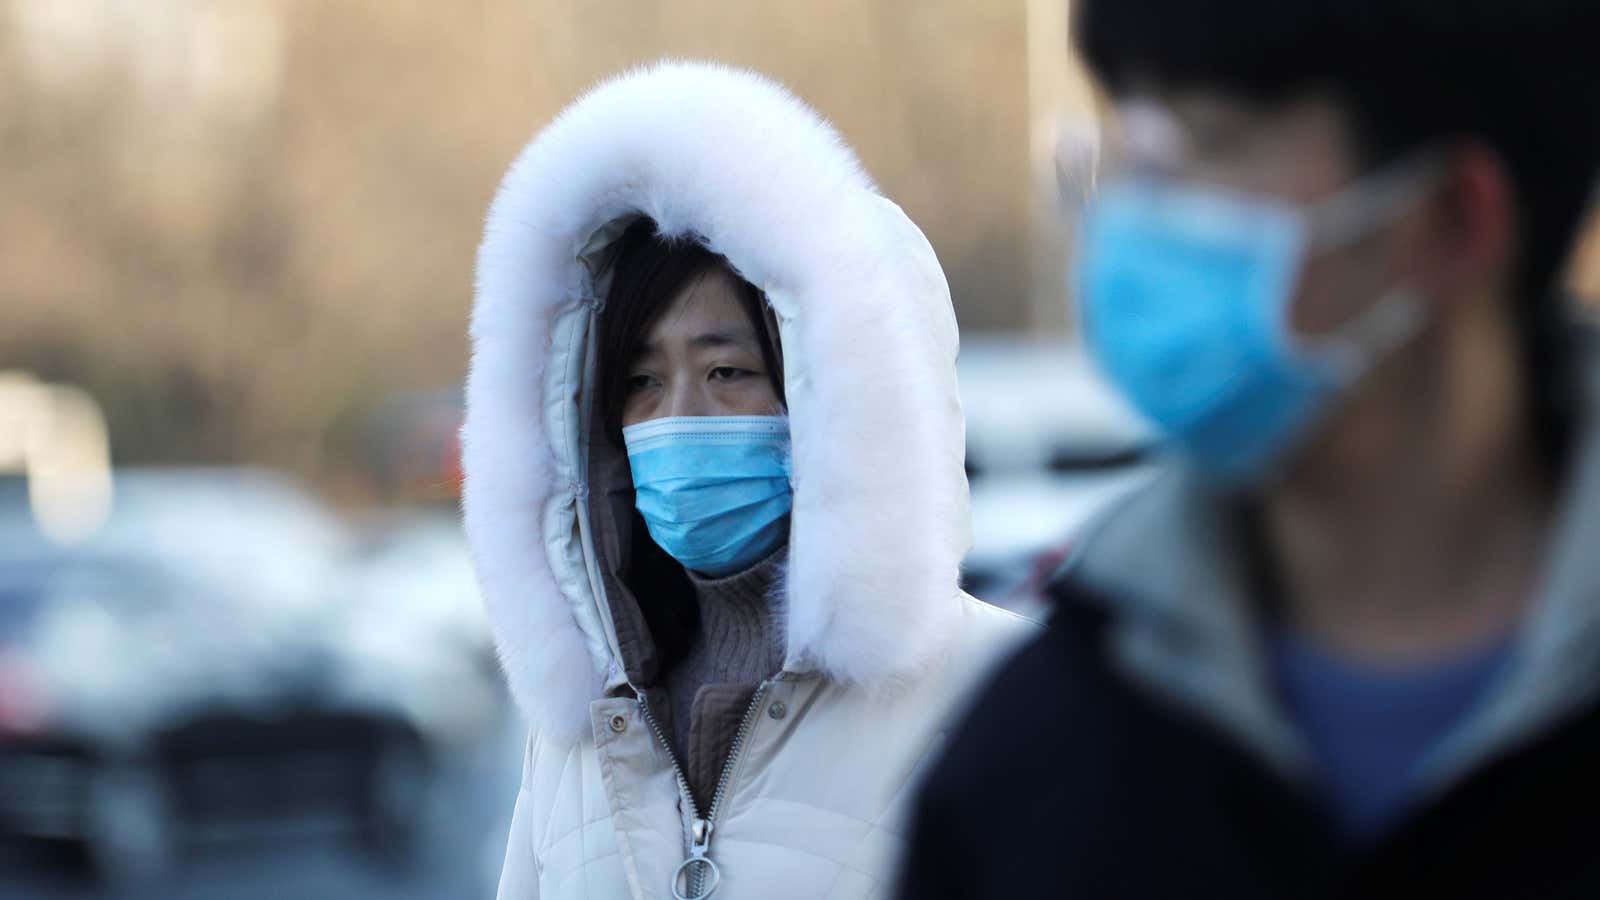 People wearing face masks walk on a street on a cold winter day, following the coronavirus disease (COVID-19) outbreak, in Beijing, China, December 21, 2020.â€¦